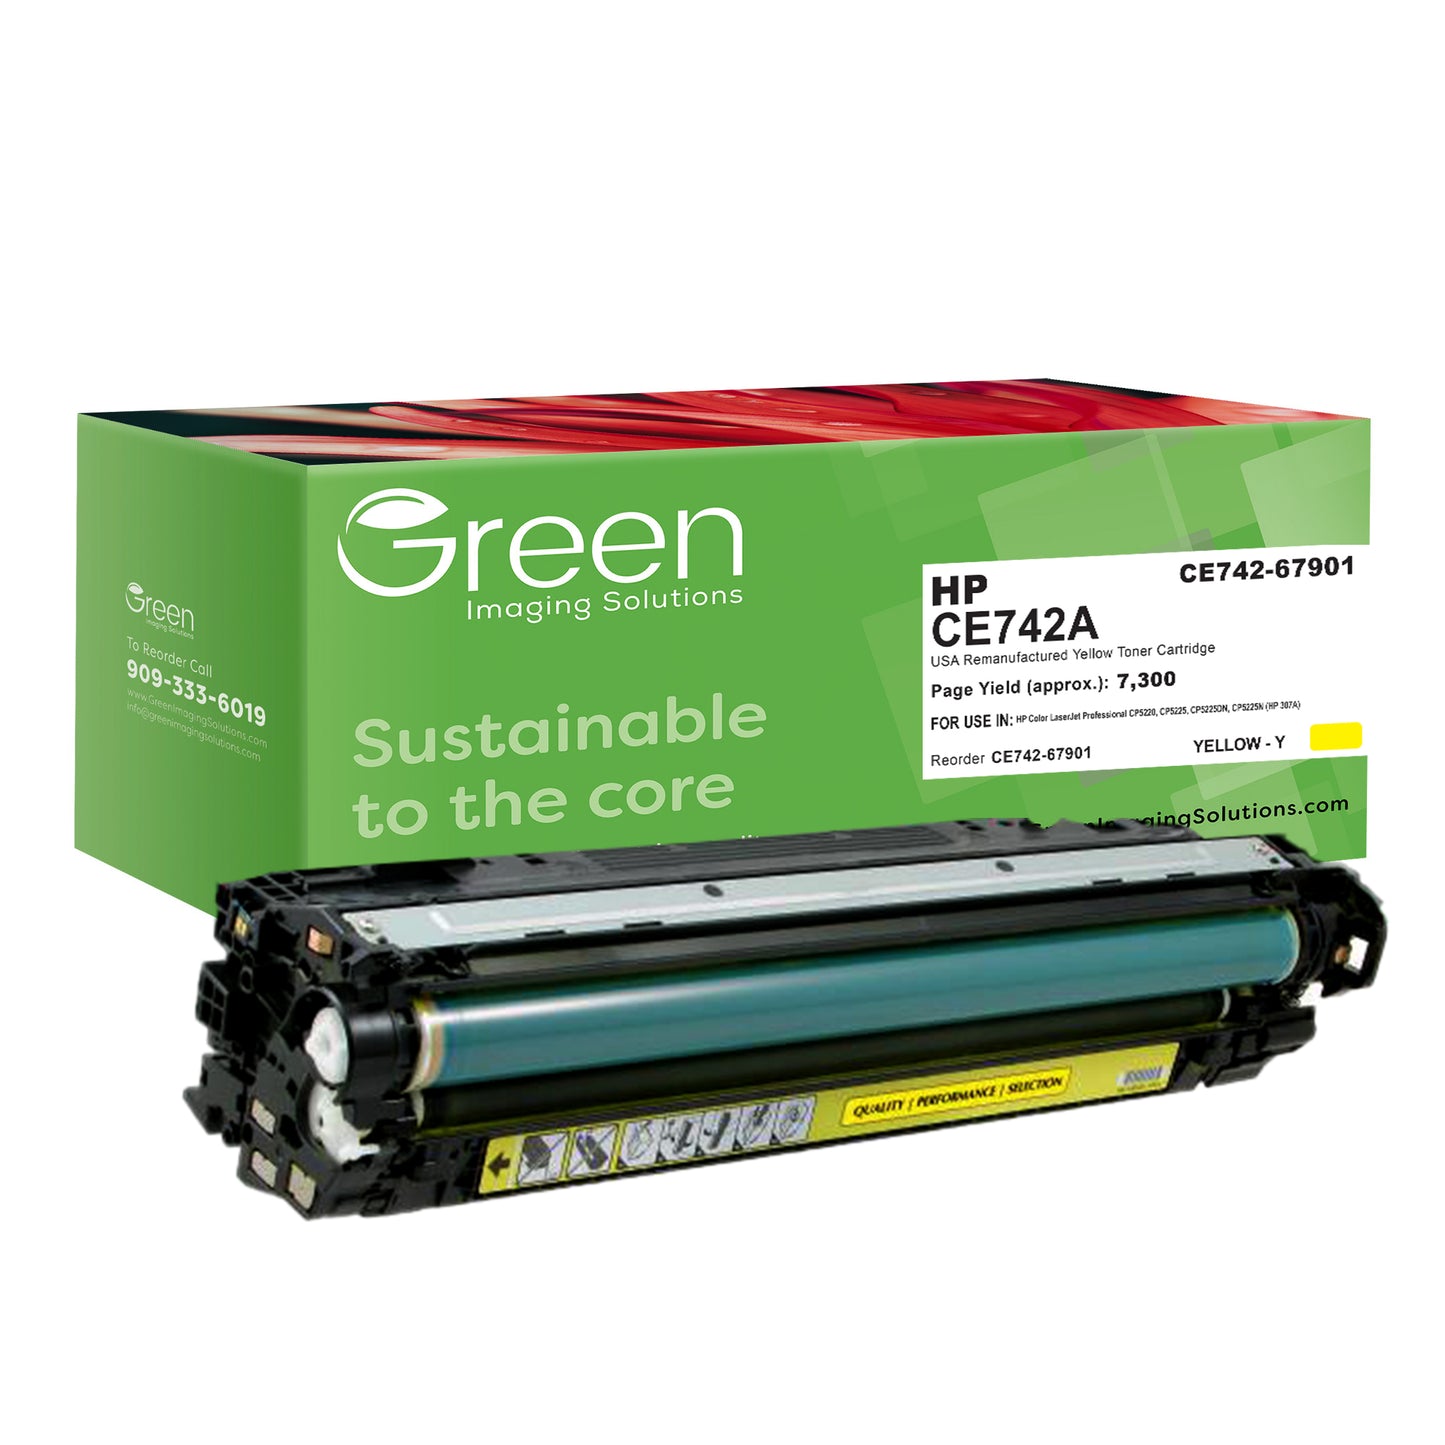 GIS USA Remanufactured Yellow Toner Cartridge for HP CE742A (HP 307A)